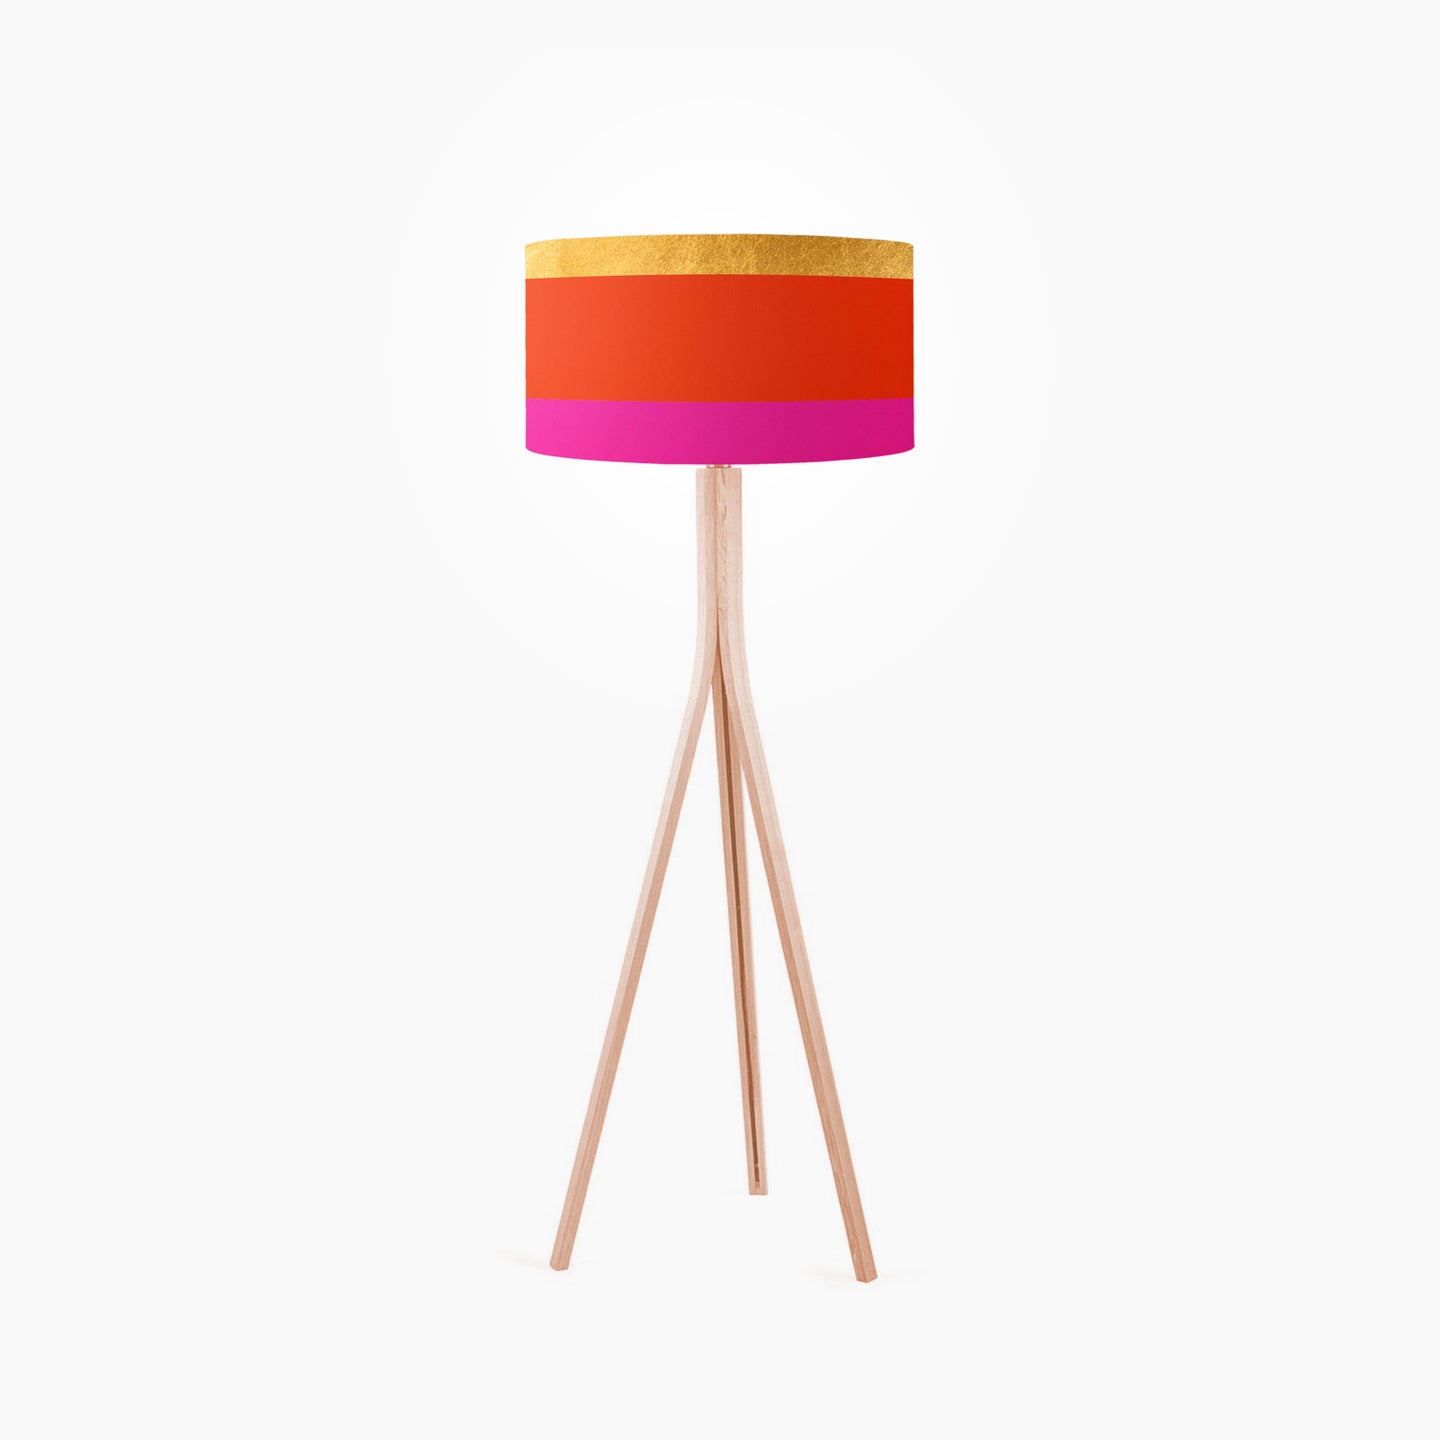 Gold, Orange and Pink Stripes drum lampshade, Gold or White Lining, Diameter 35cm (14